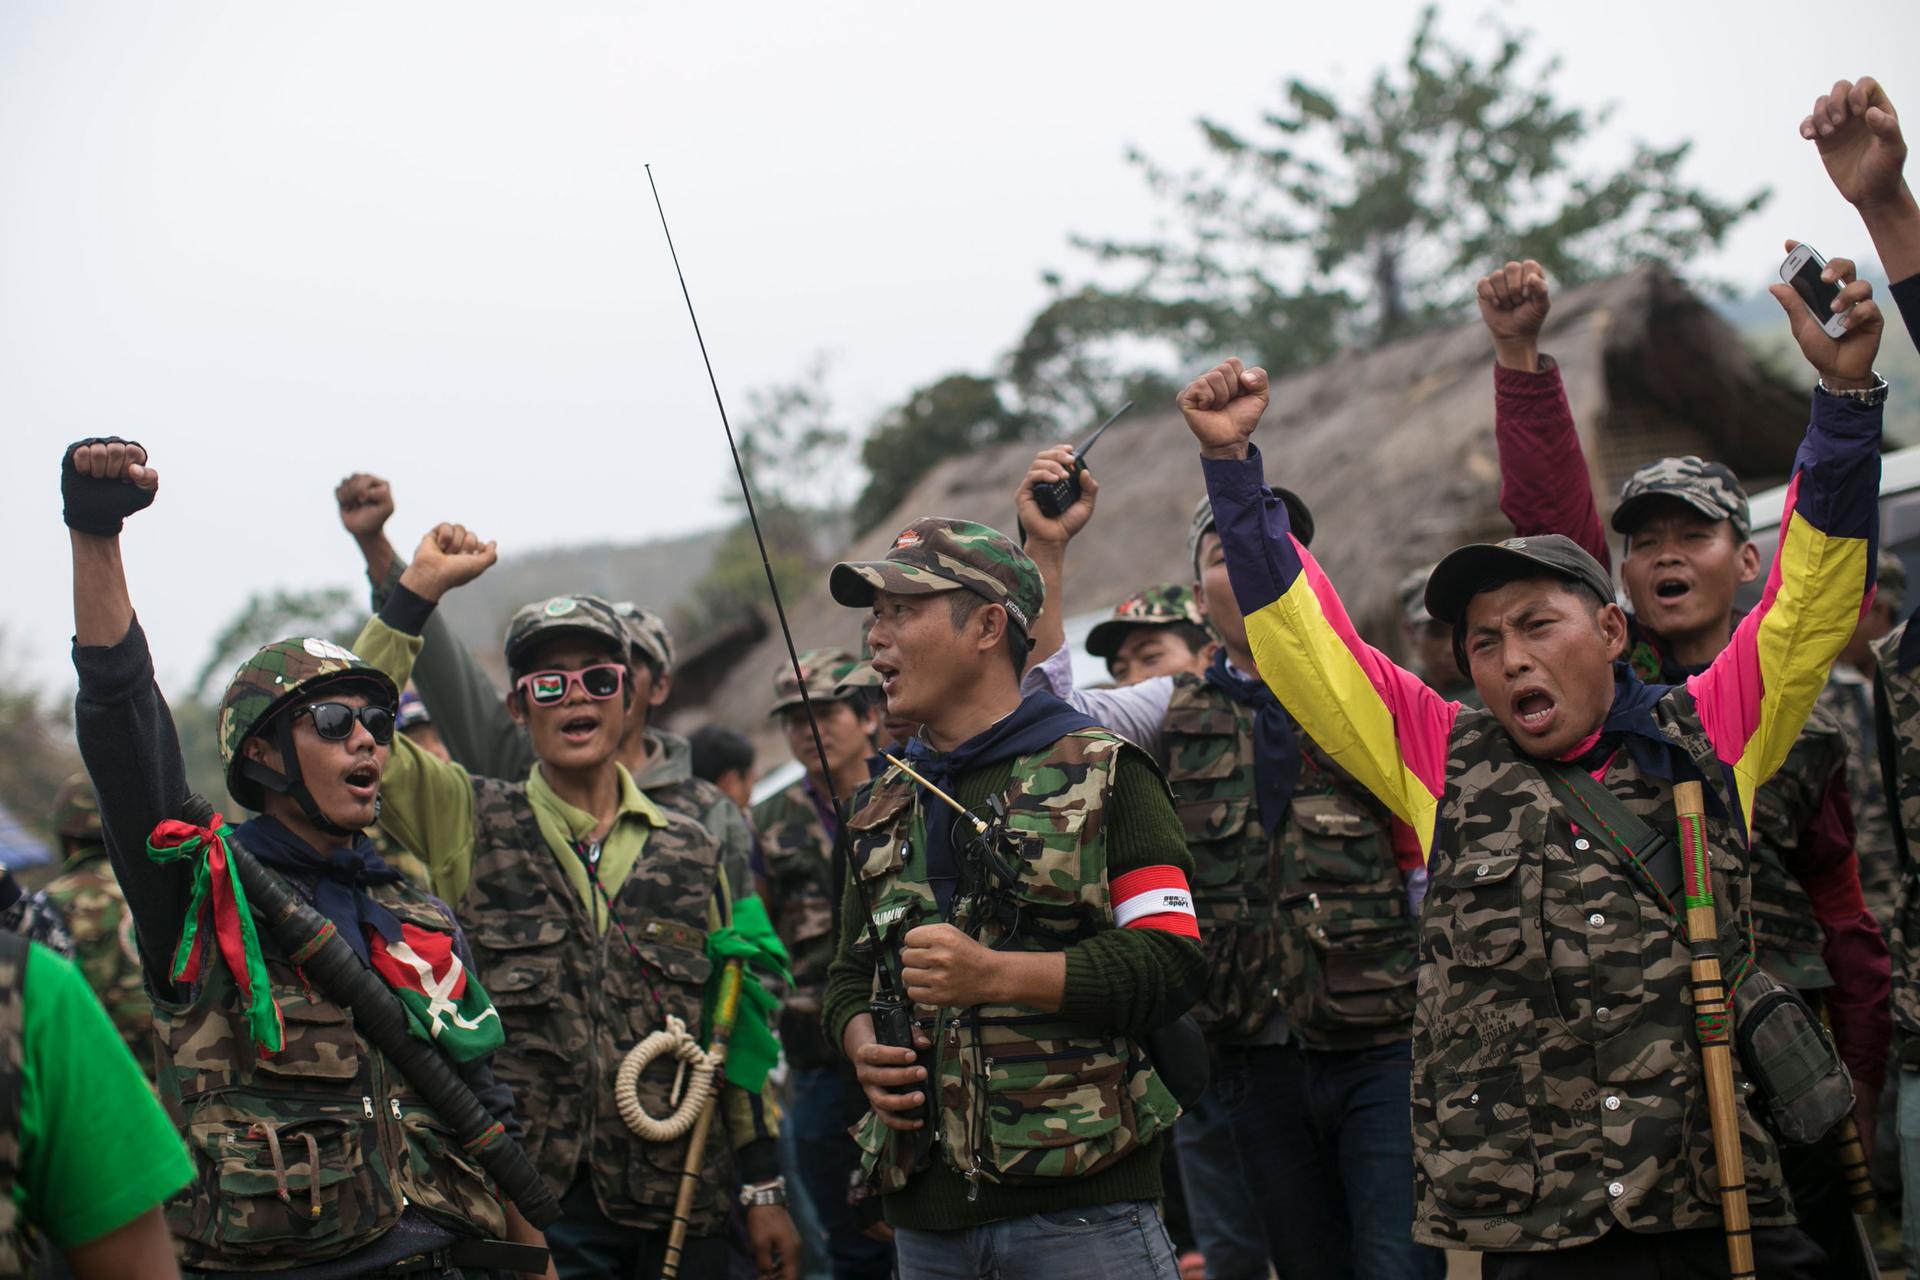 Members of community based anti-narcotic campaigners known as The Pat Jasan shout slogans protesting against the government’s ban prohibiting the group from destroying poppy farms in Wai Maw, northern Kachin State, Myanmar, Sunday Feb. 21, 2016. 